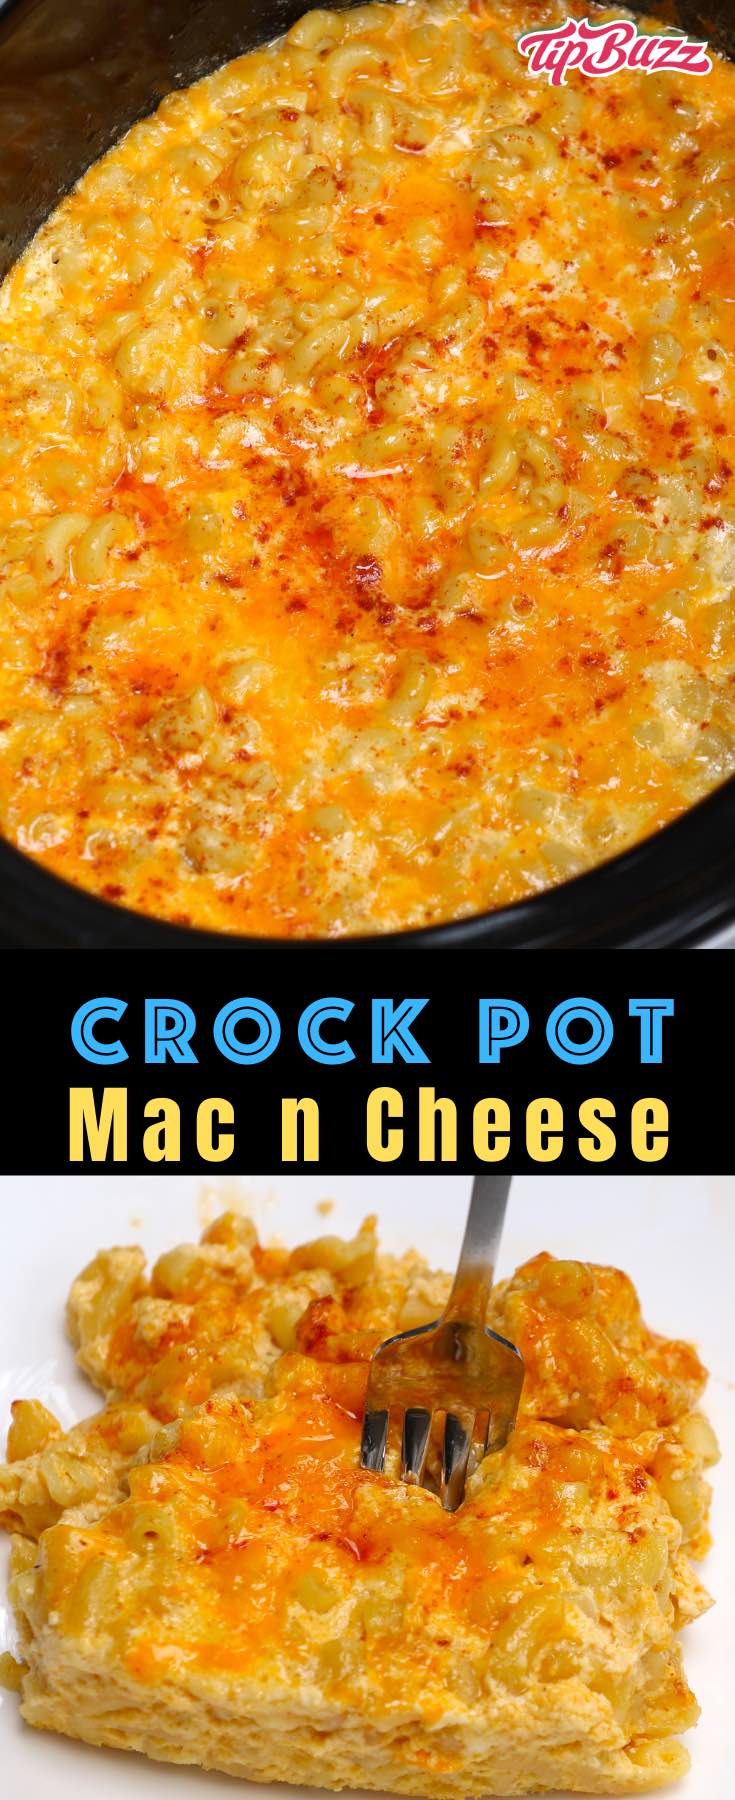 Trisha Yearwood Mac and Cheese is rich, creamy and full of southern flavors. The best crockpot mac and cheese recipe! #macandcheese